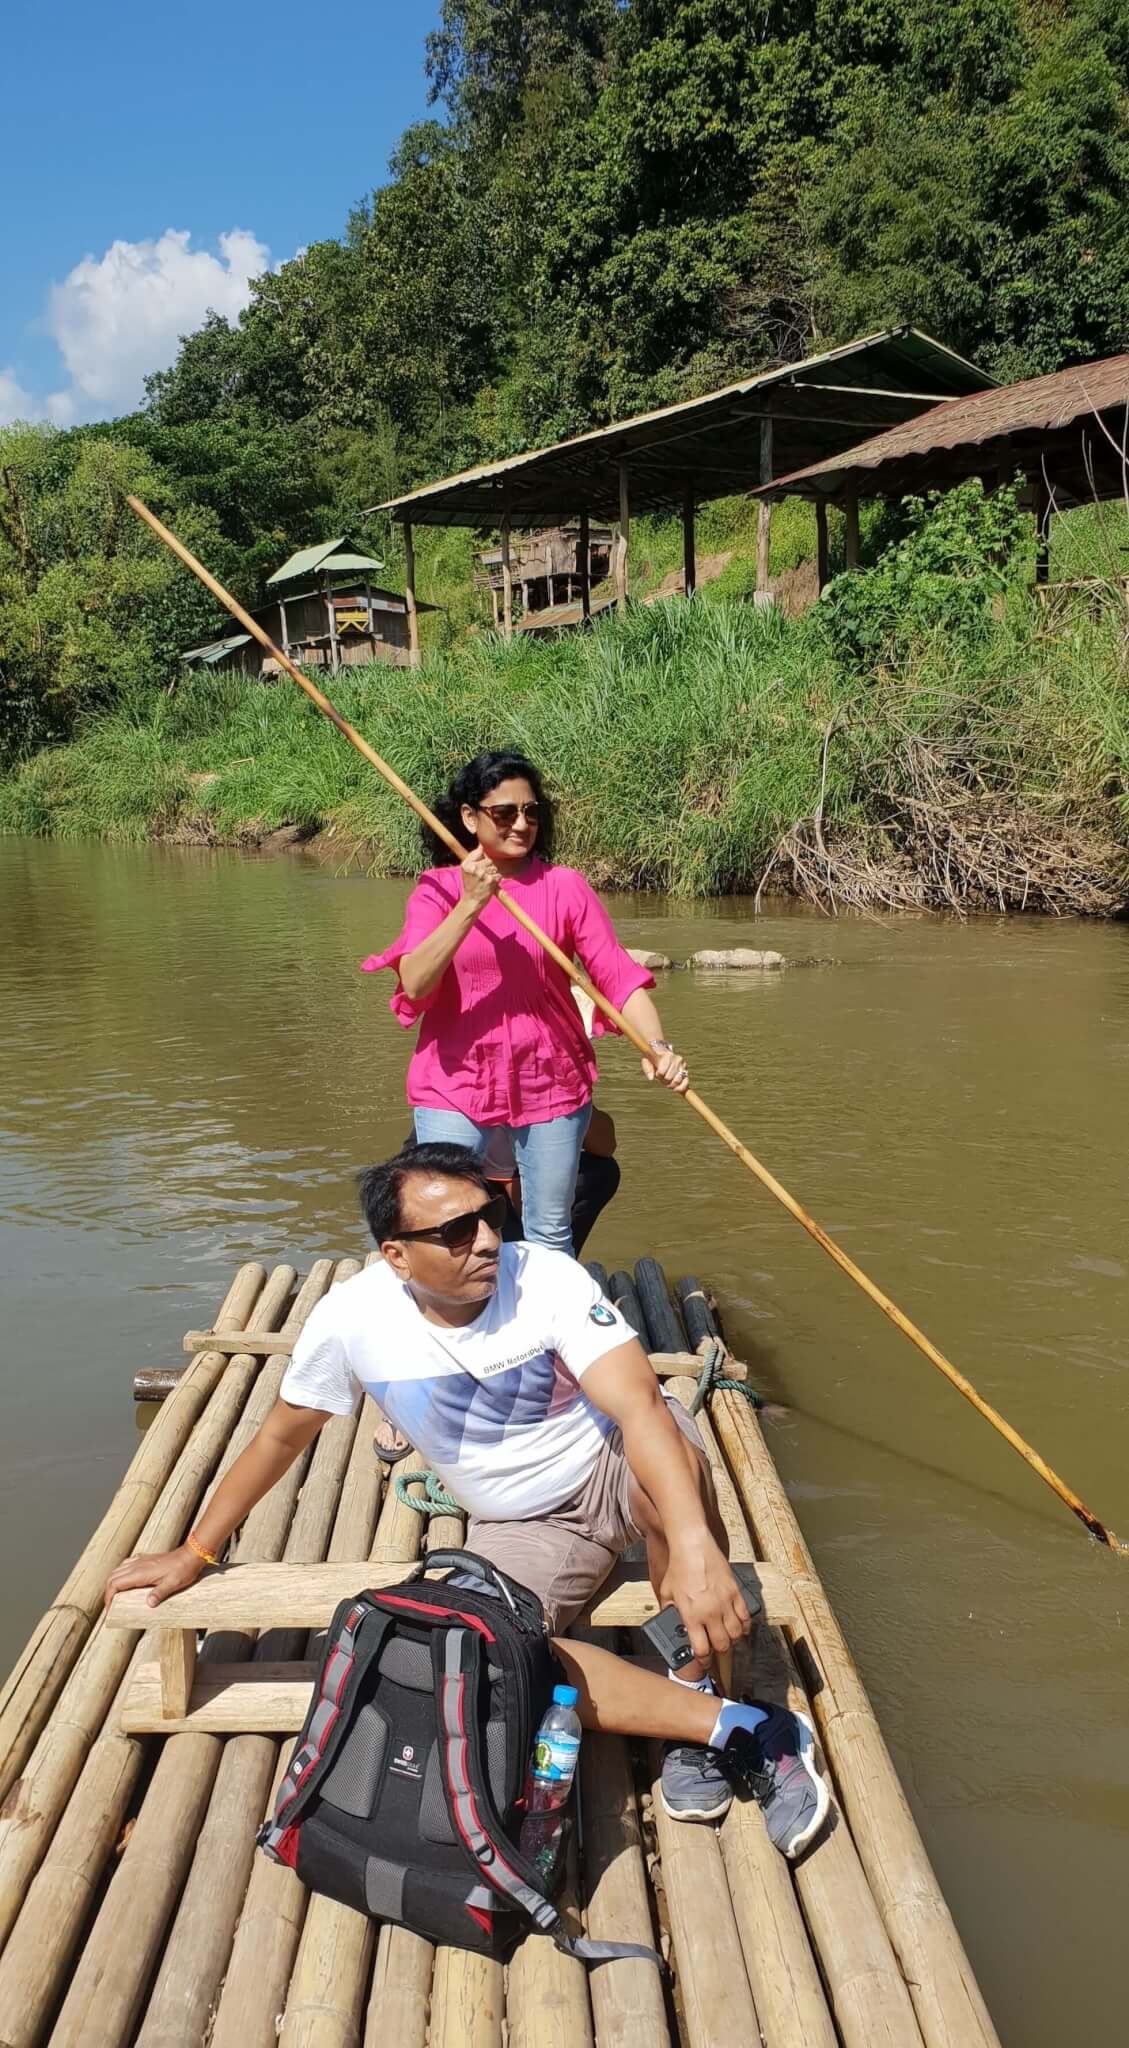 Mom guiding the bamboo raft herself as dad enjoys the views of the Mae Taeng river